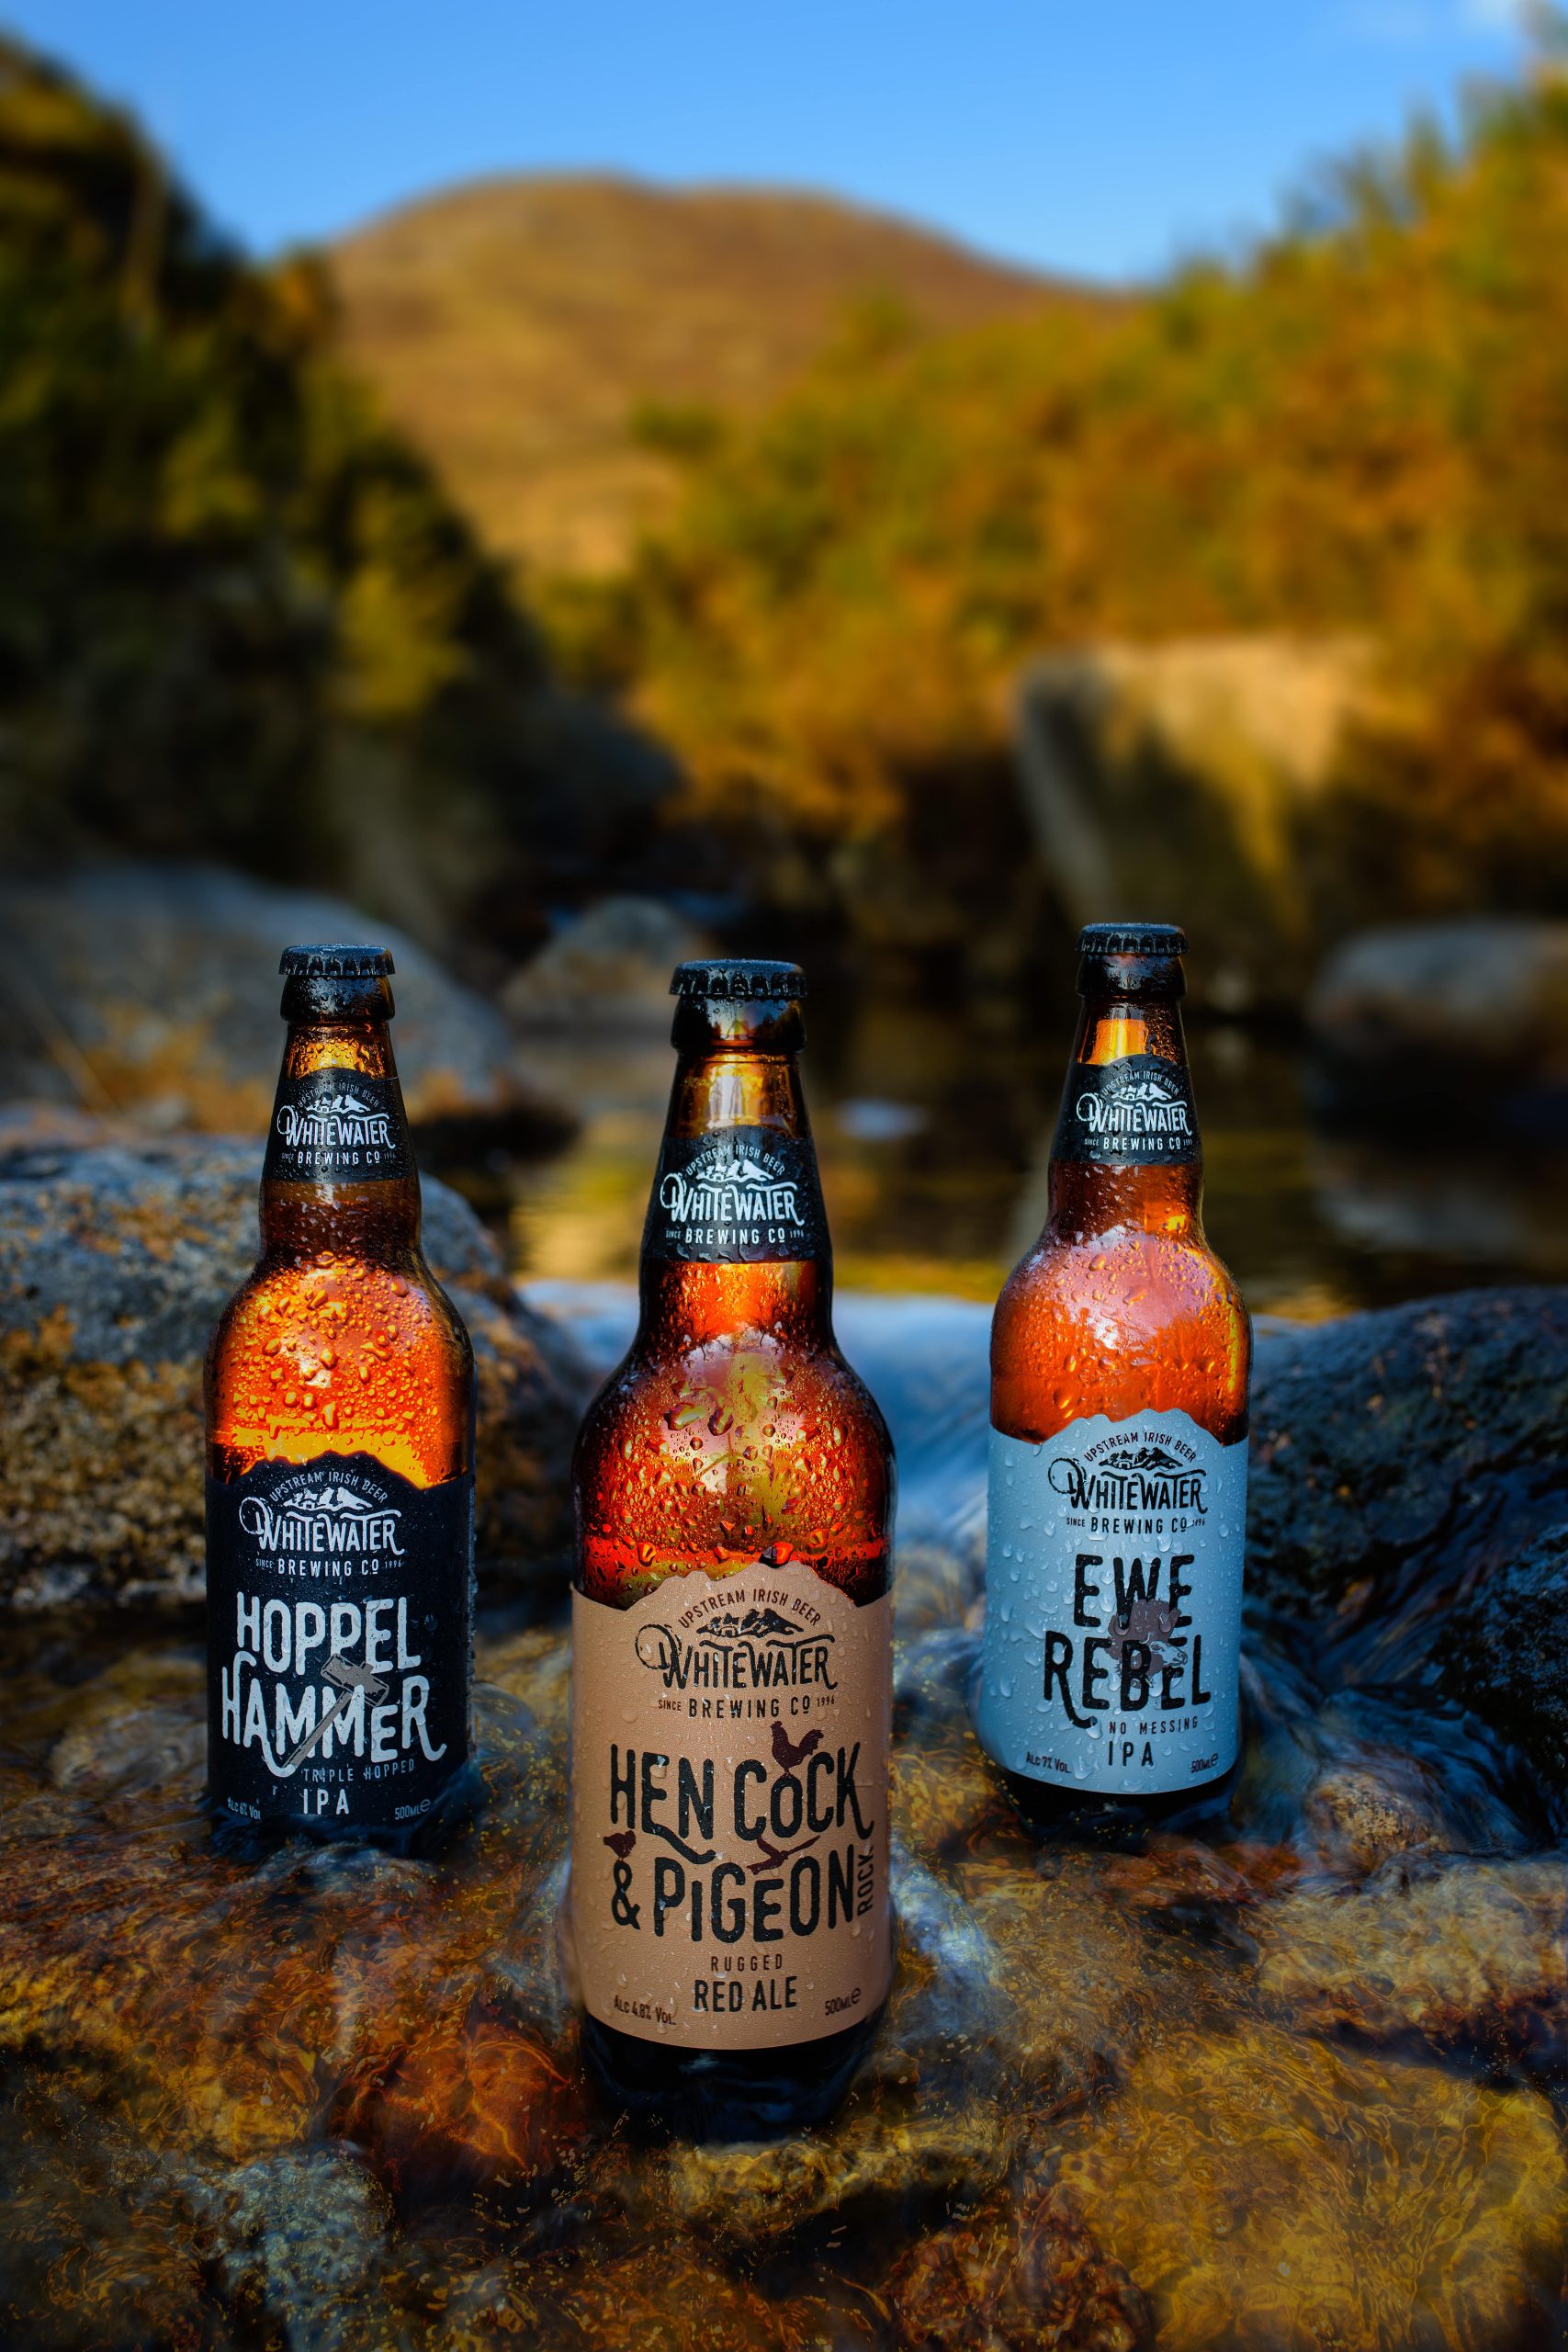 Three beautiful bottles of craft beer from Whitewater Brewing Company in Co. Down, photographed in the Mourne Mountains. High-end product photography on location.